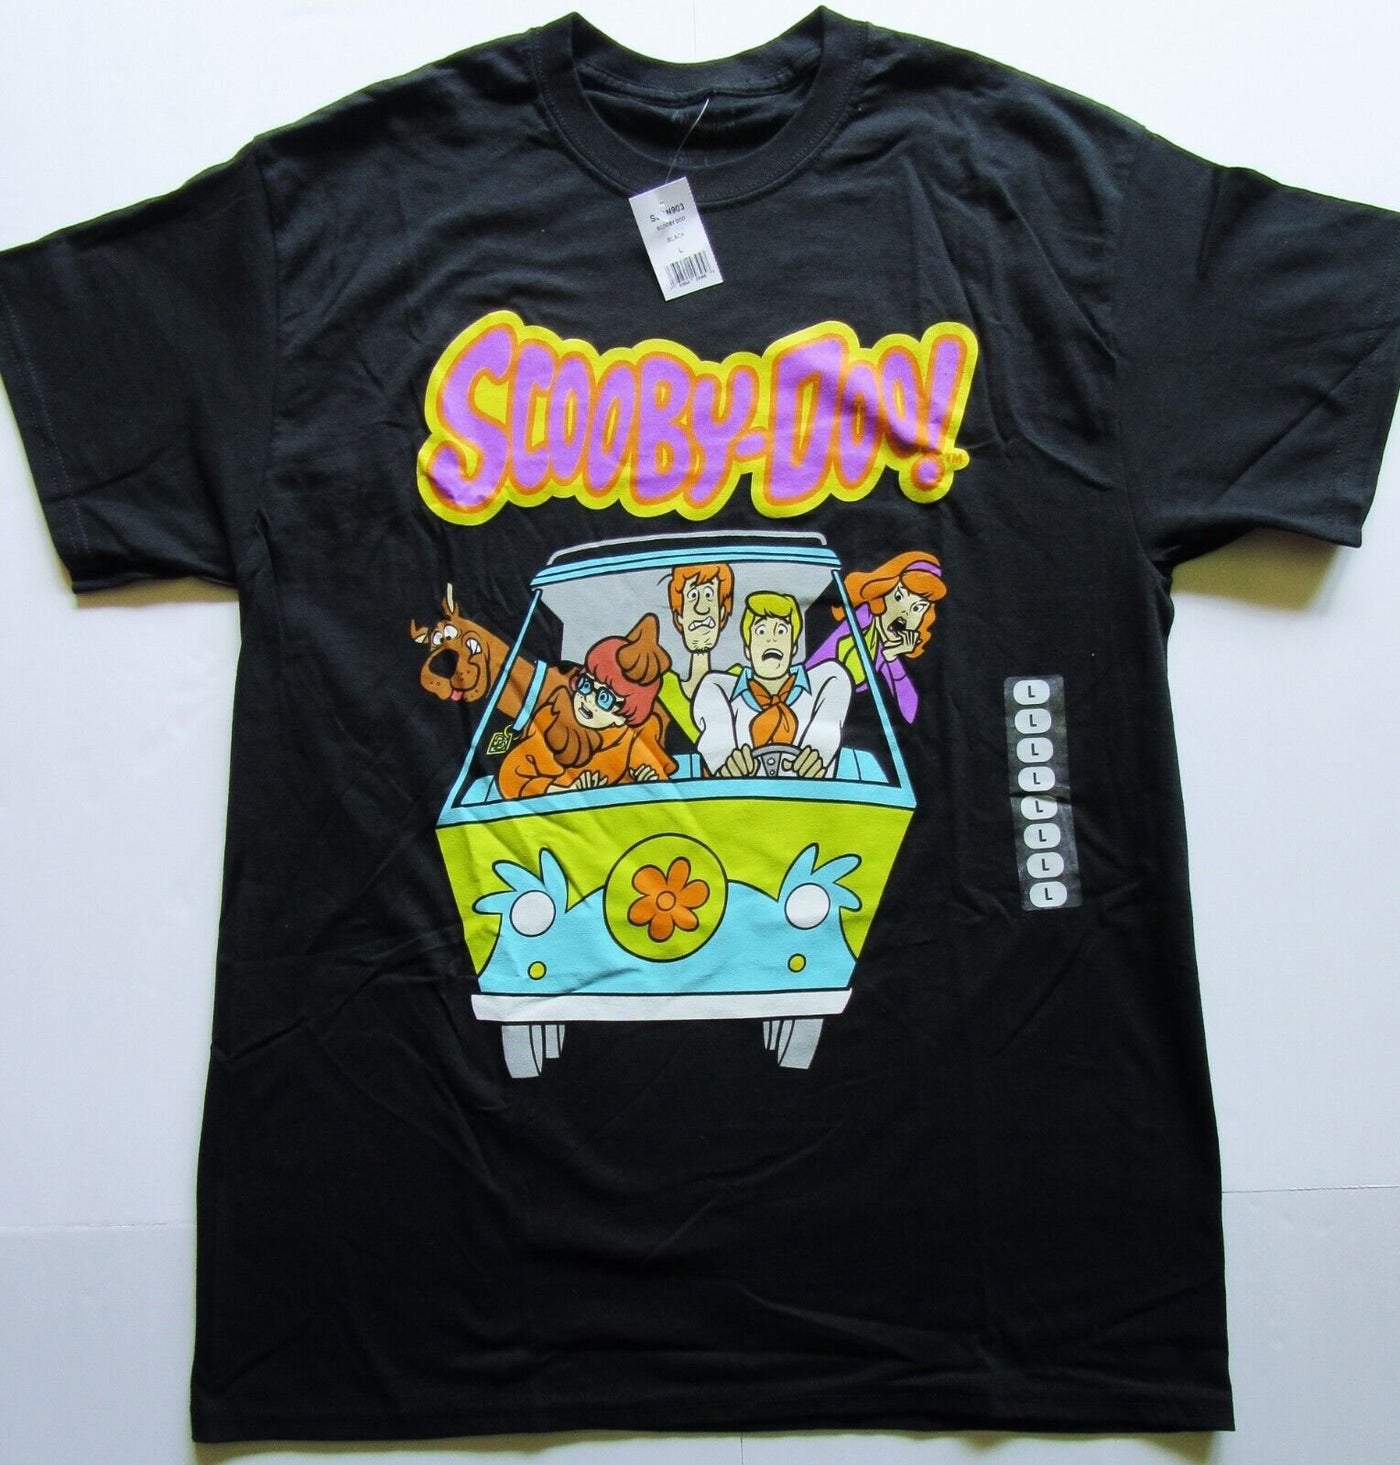 Scooby-Doo Large Black T-Shirt Scooby Doo & The Gang Size L ~ T Shirt